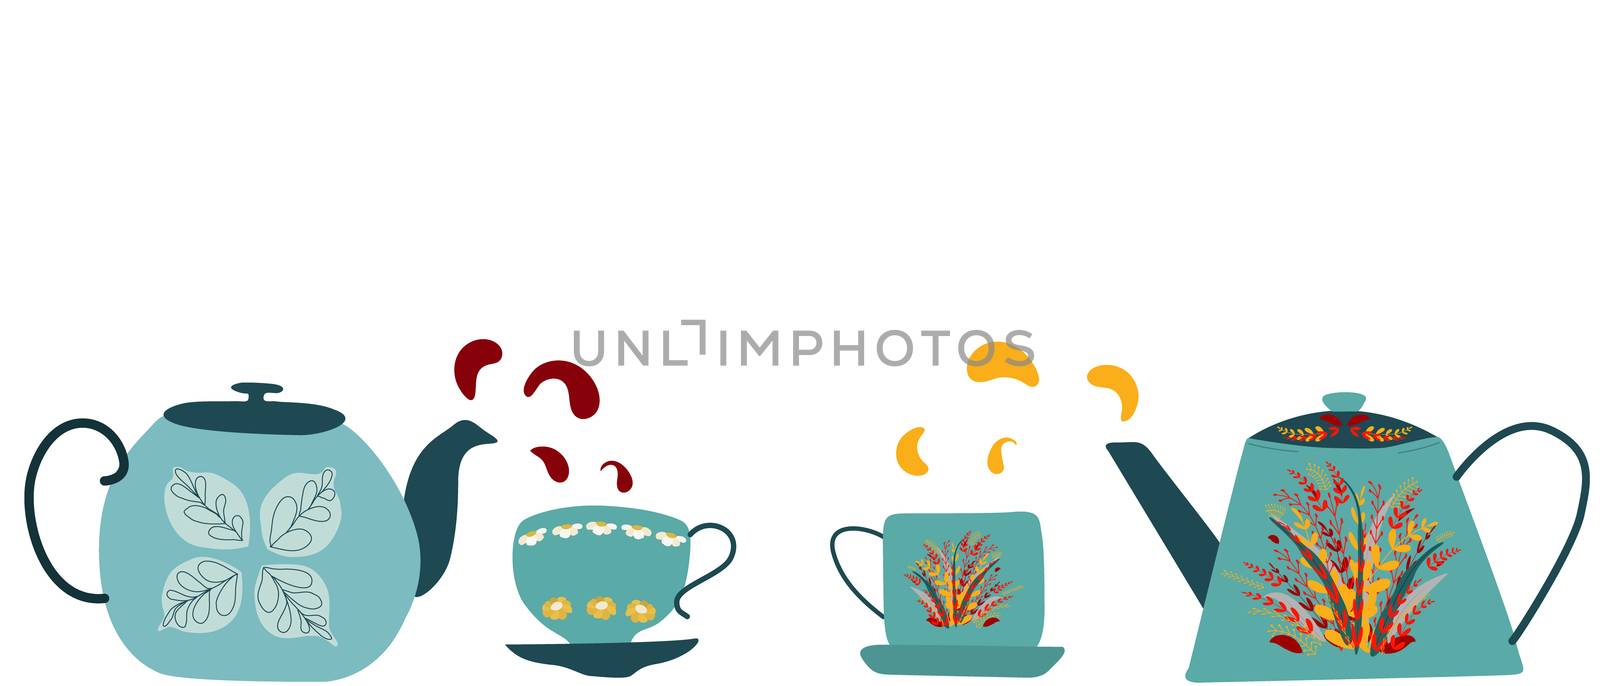 Horisontal border with retro teapots and cups. Invitation or banner template for tea party. Space for text. Vector illustration.